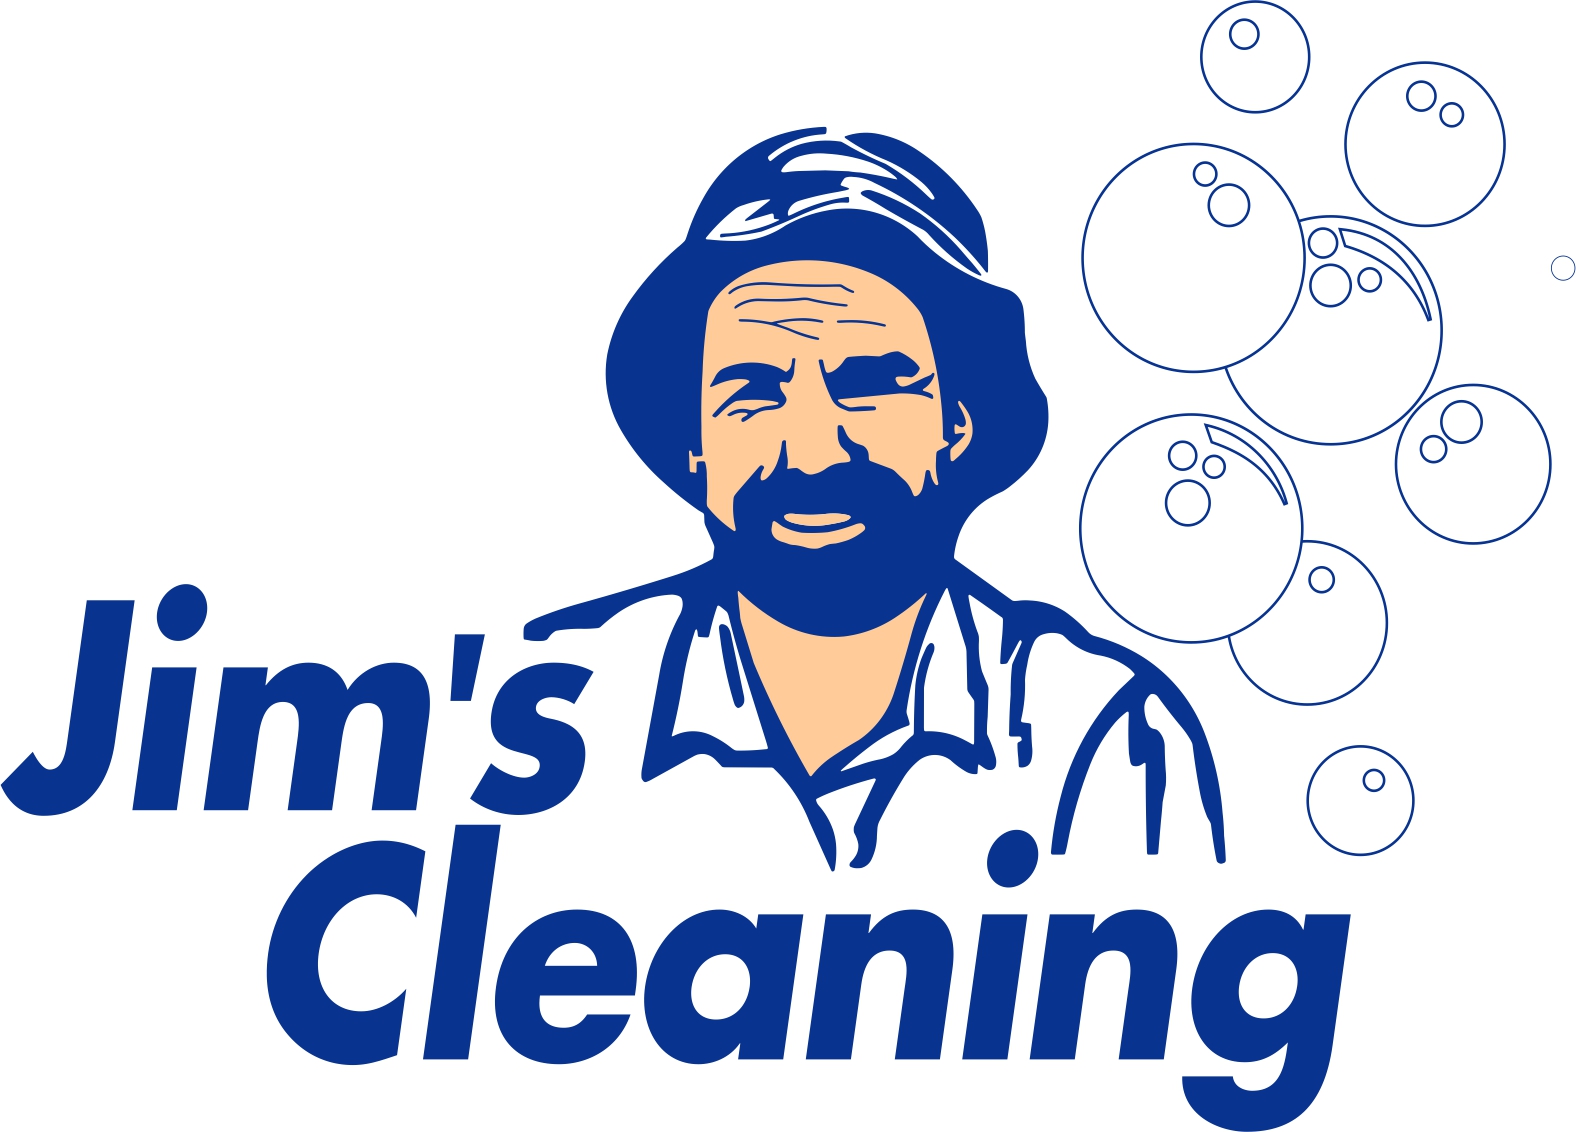 Jims Cleaning Service for a One Bedroom & One Bathroom House incl. Complimentary Oven & Range Hood Clean - Options for up to a Five Bedroom House